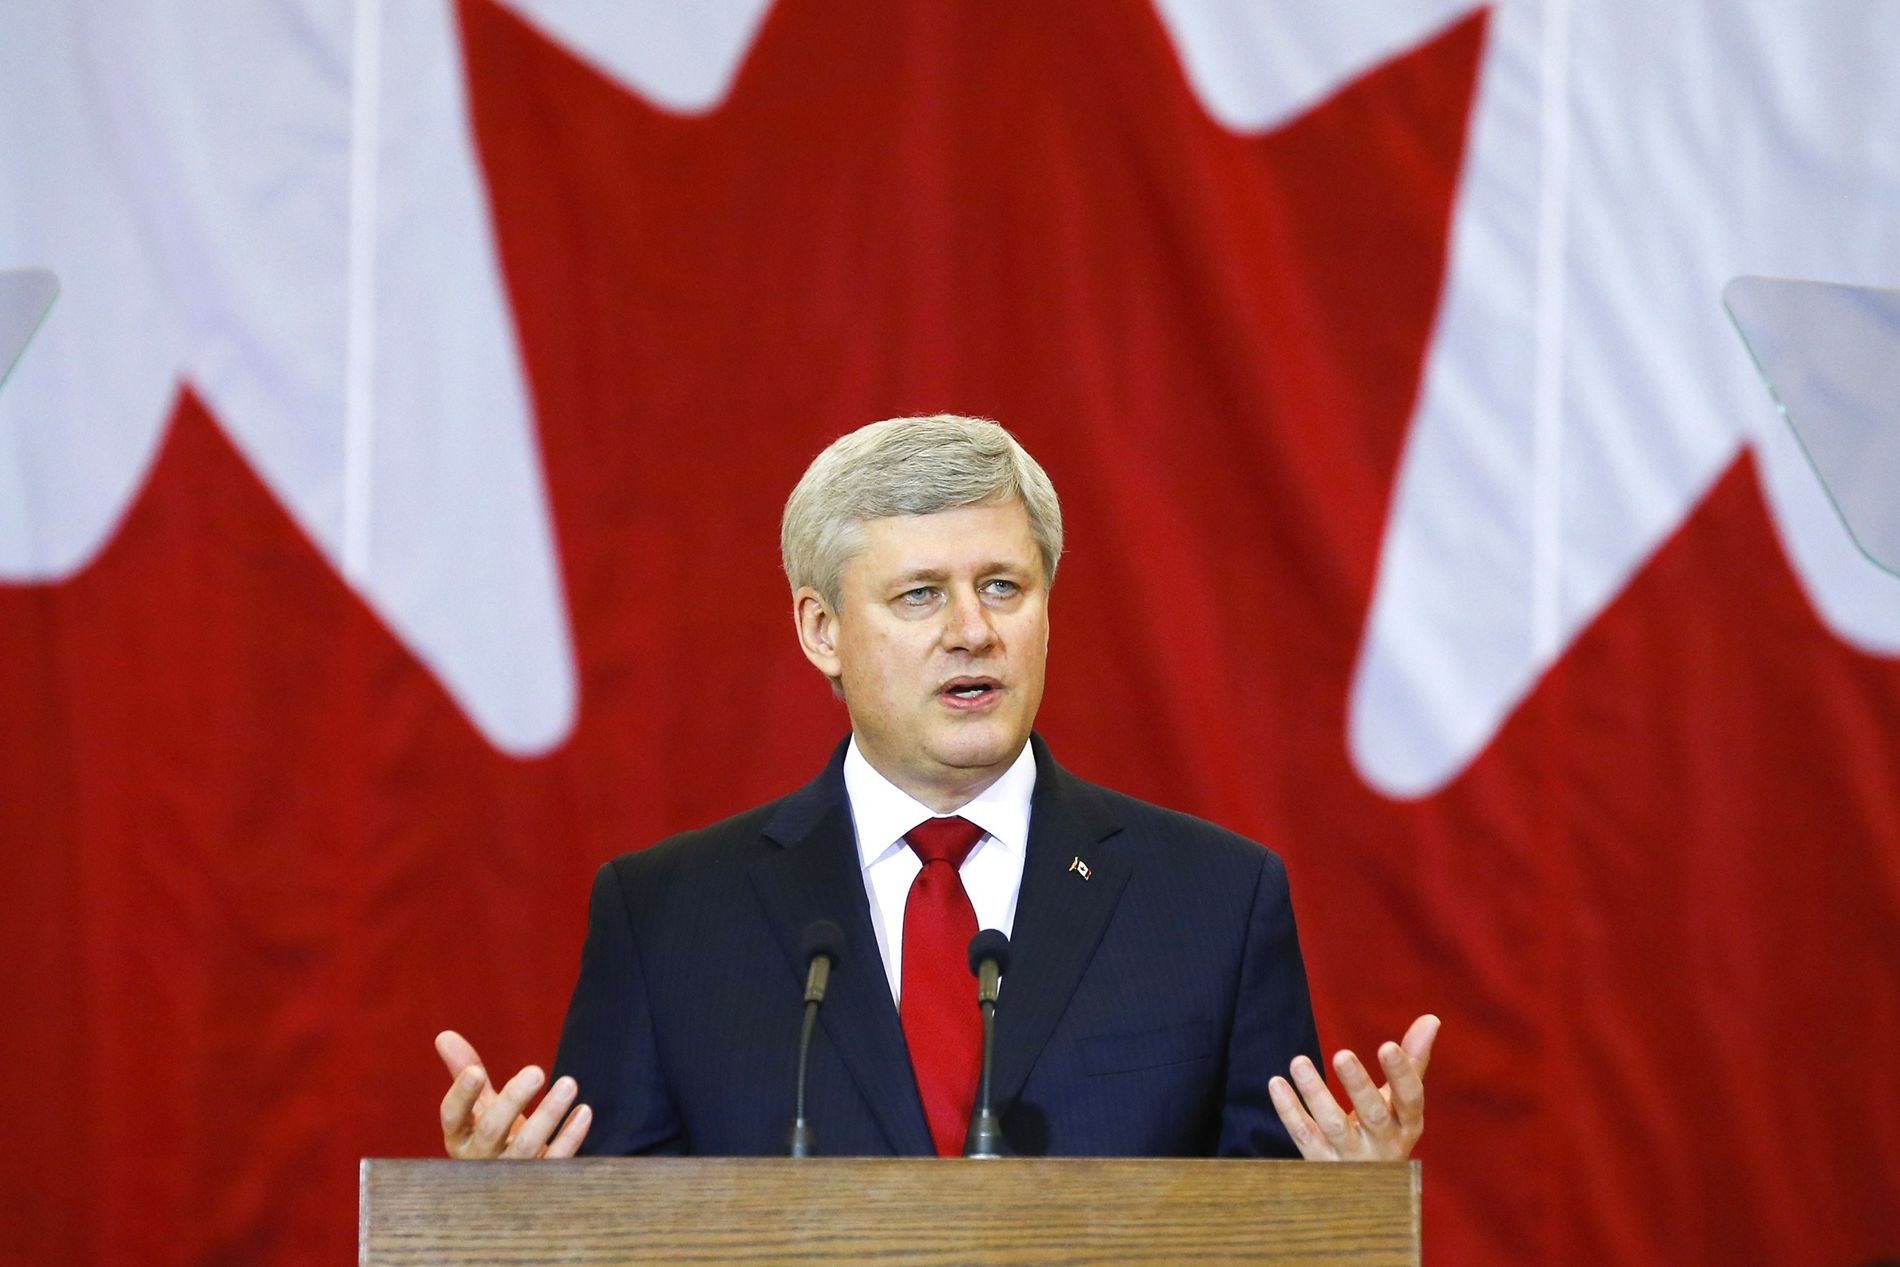 Stephen Harper makes thinly veiled critique of China in historic visit to Taiwan